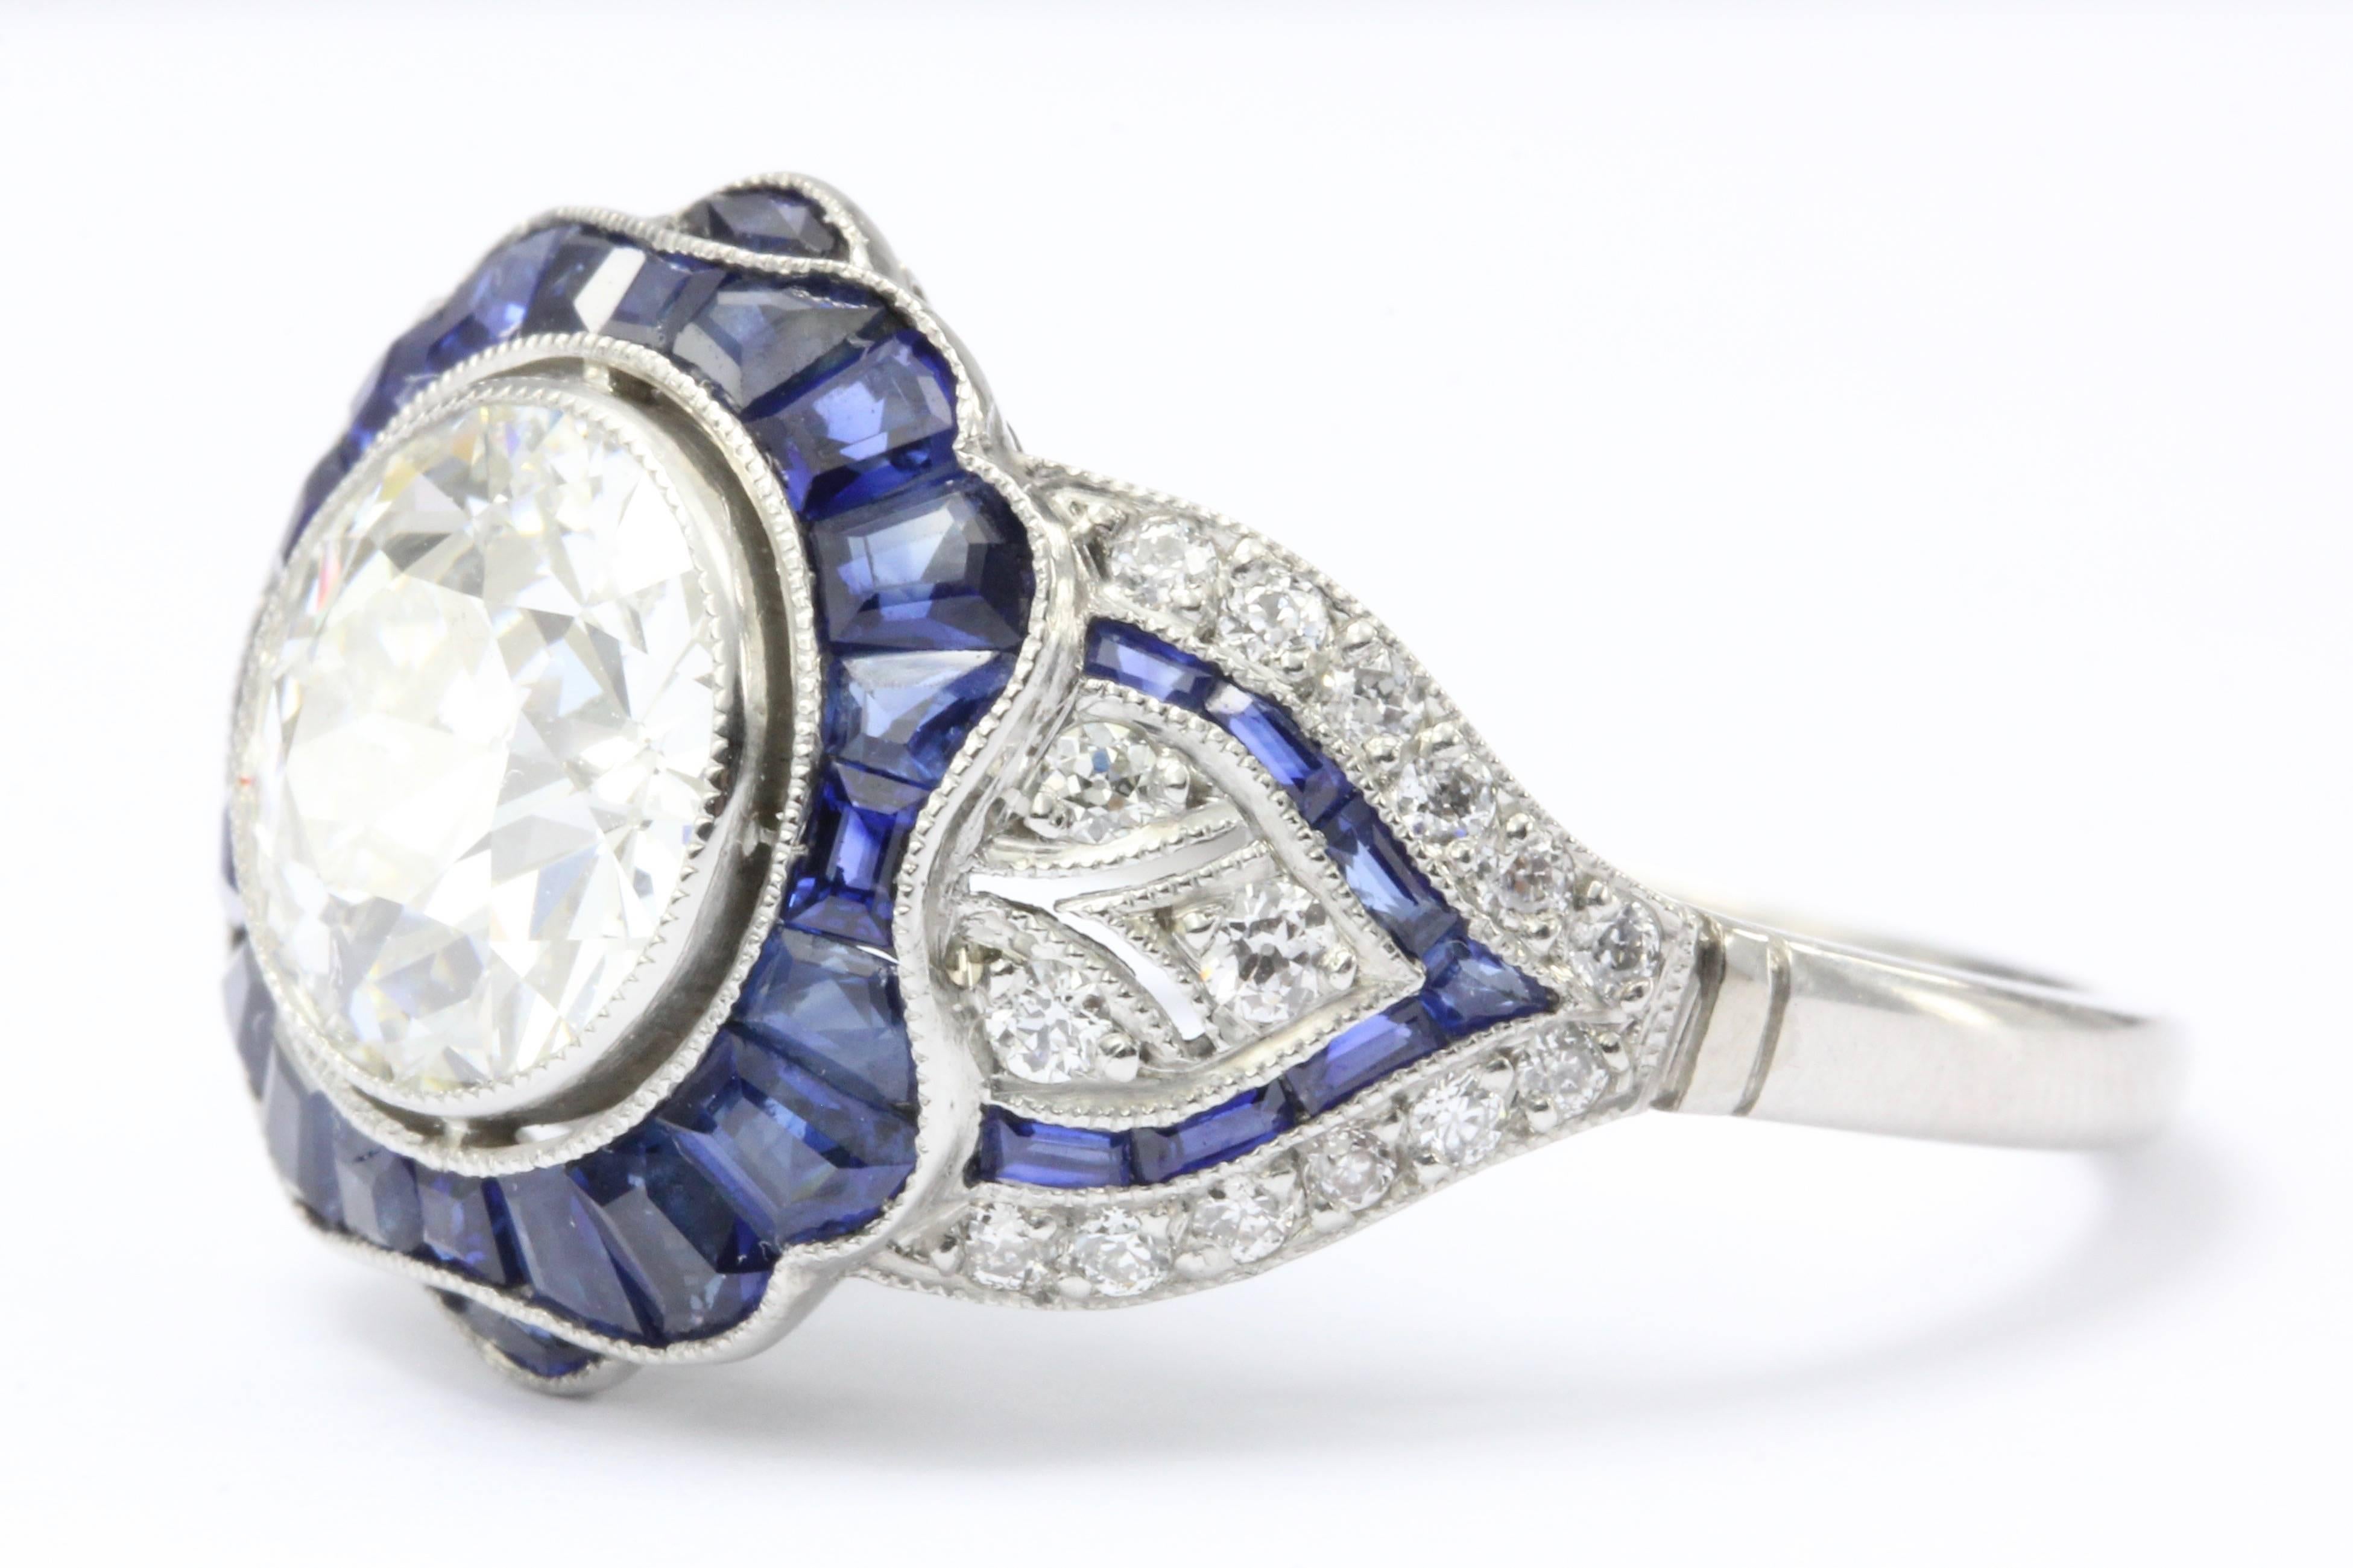 A fabulous handmade Art Deco style piece based on an Art Deco beauty. This lovely platinum ring features calibre cut natural blue sapphires, accent diamonds, and a gorgeous GIA certified 2.07 carat old European cut diamond in the center. 

Main